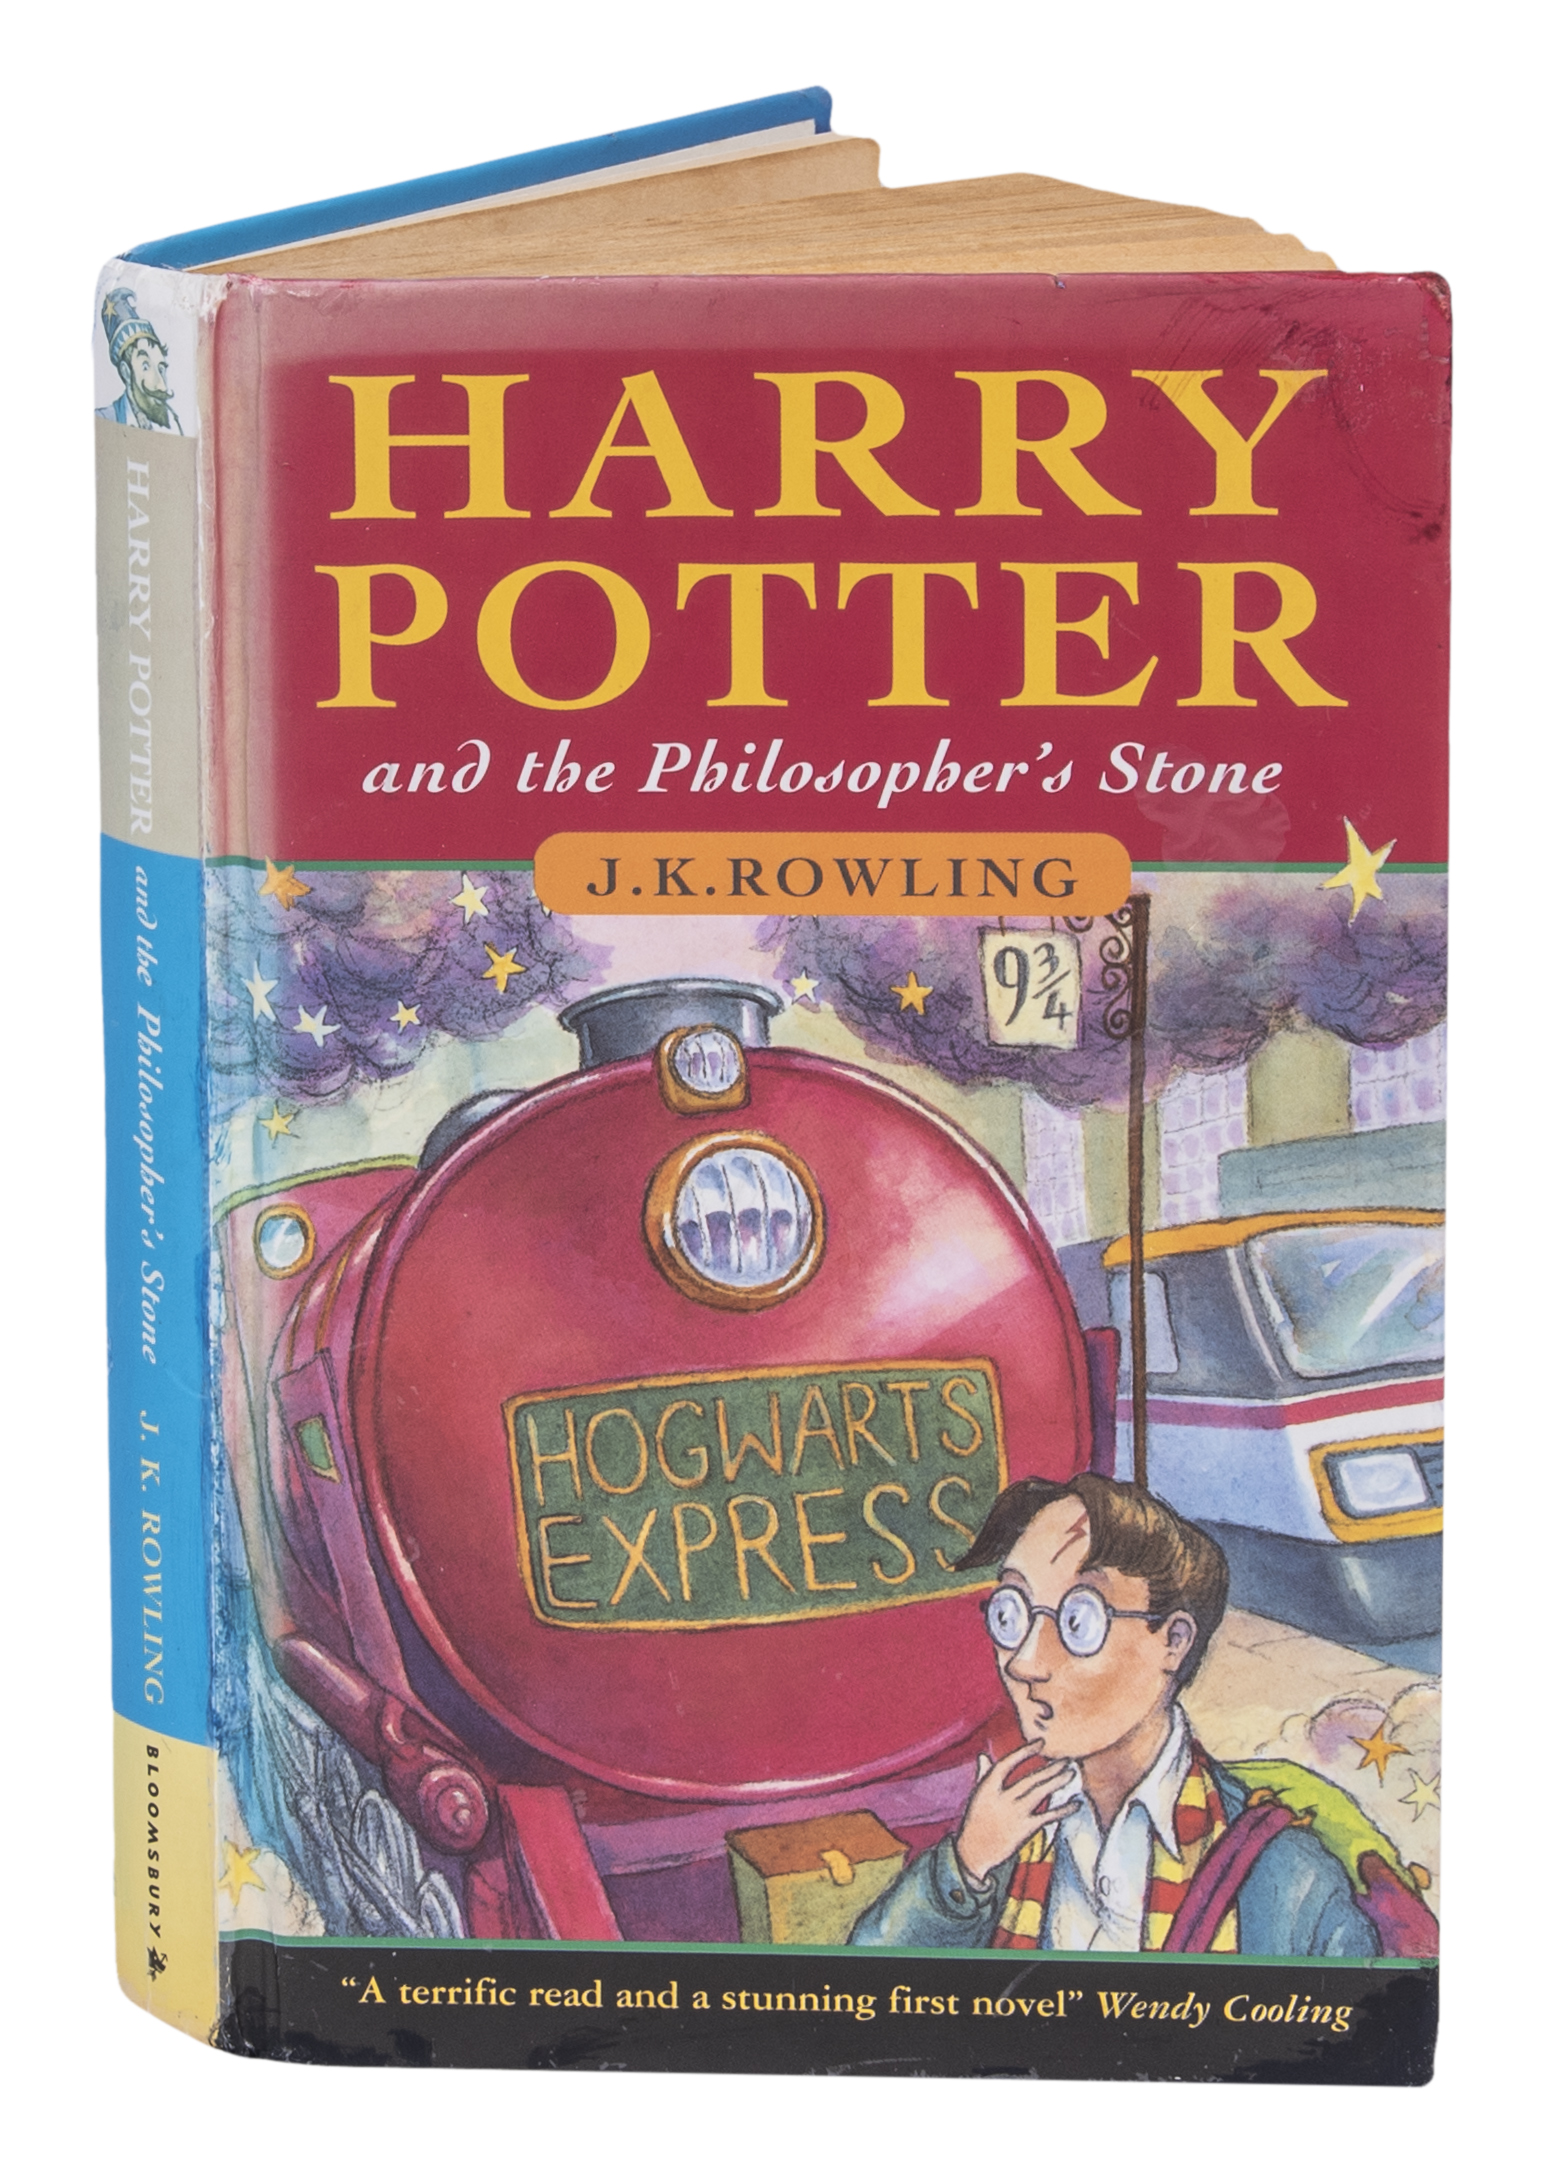 book review of novel harry potter and the philosopher's stone